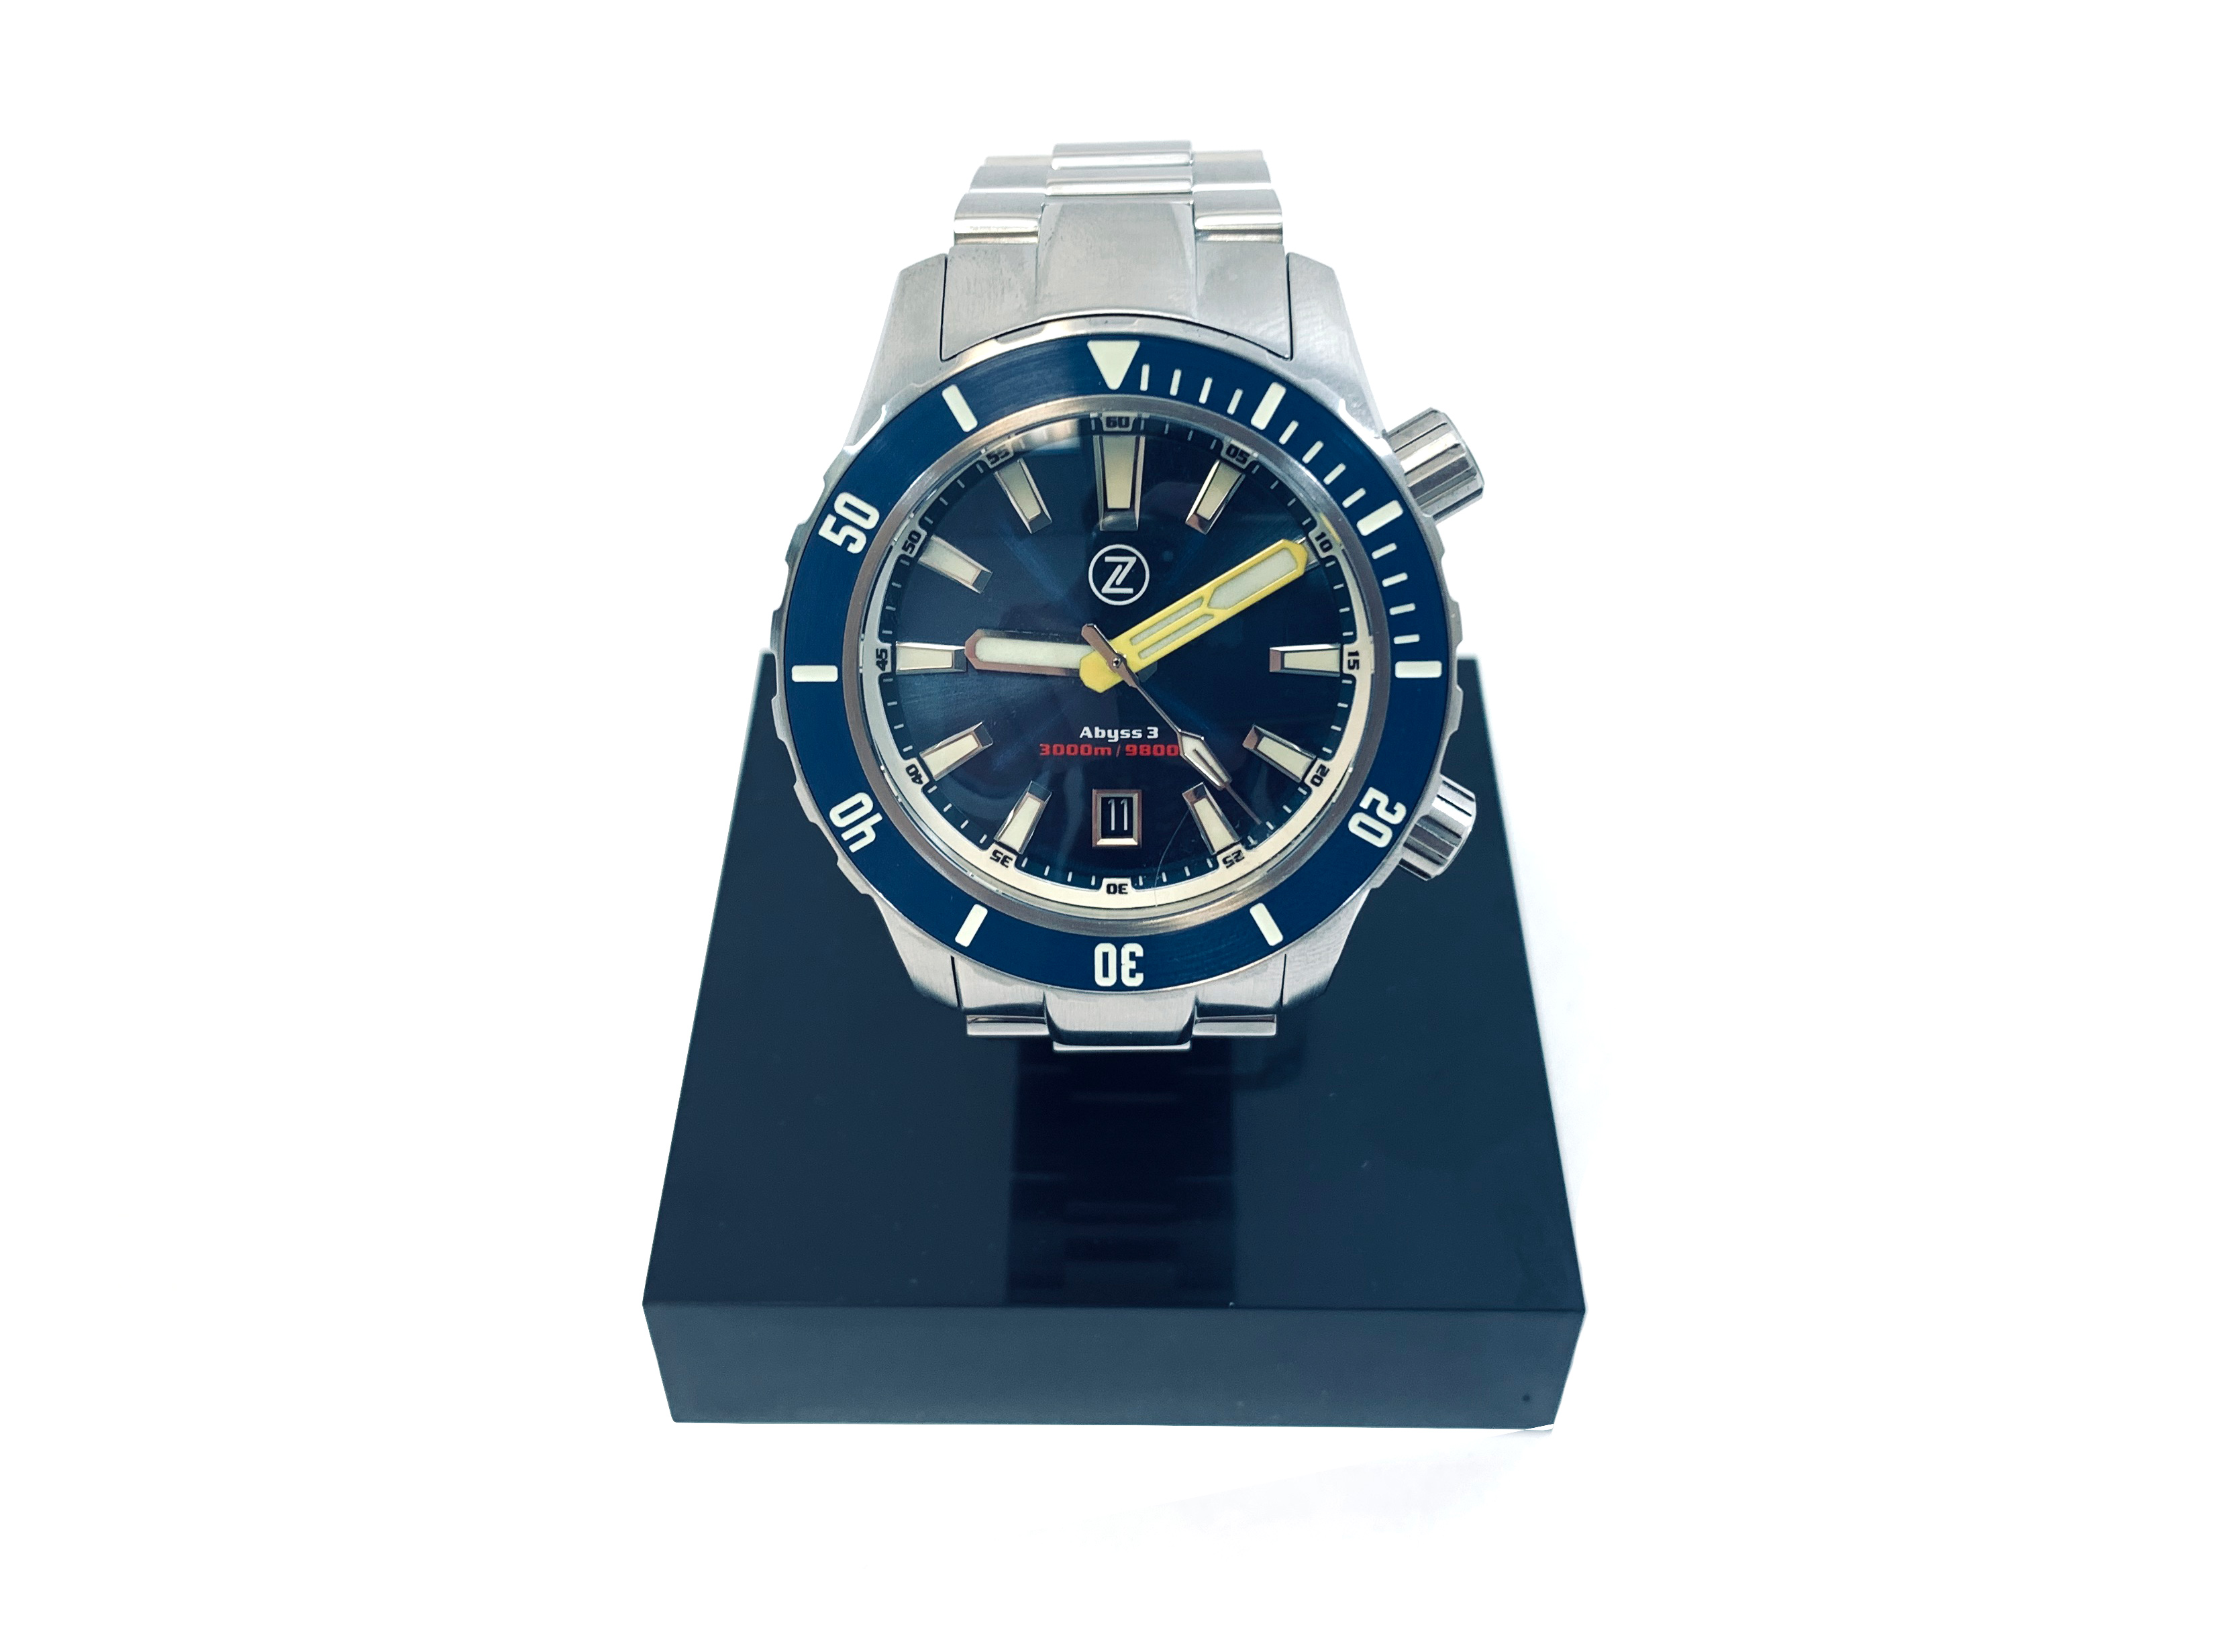 Zelos Abyss 3 3000M Steel Midnight Blue Ceramic Bezel 43mm Yellow hands Limited Edition Automatic Diver Watch